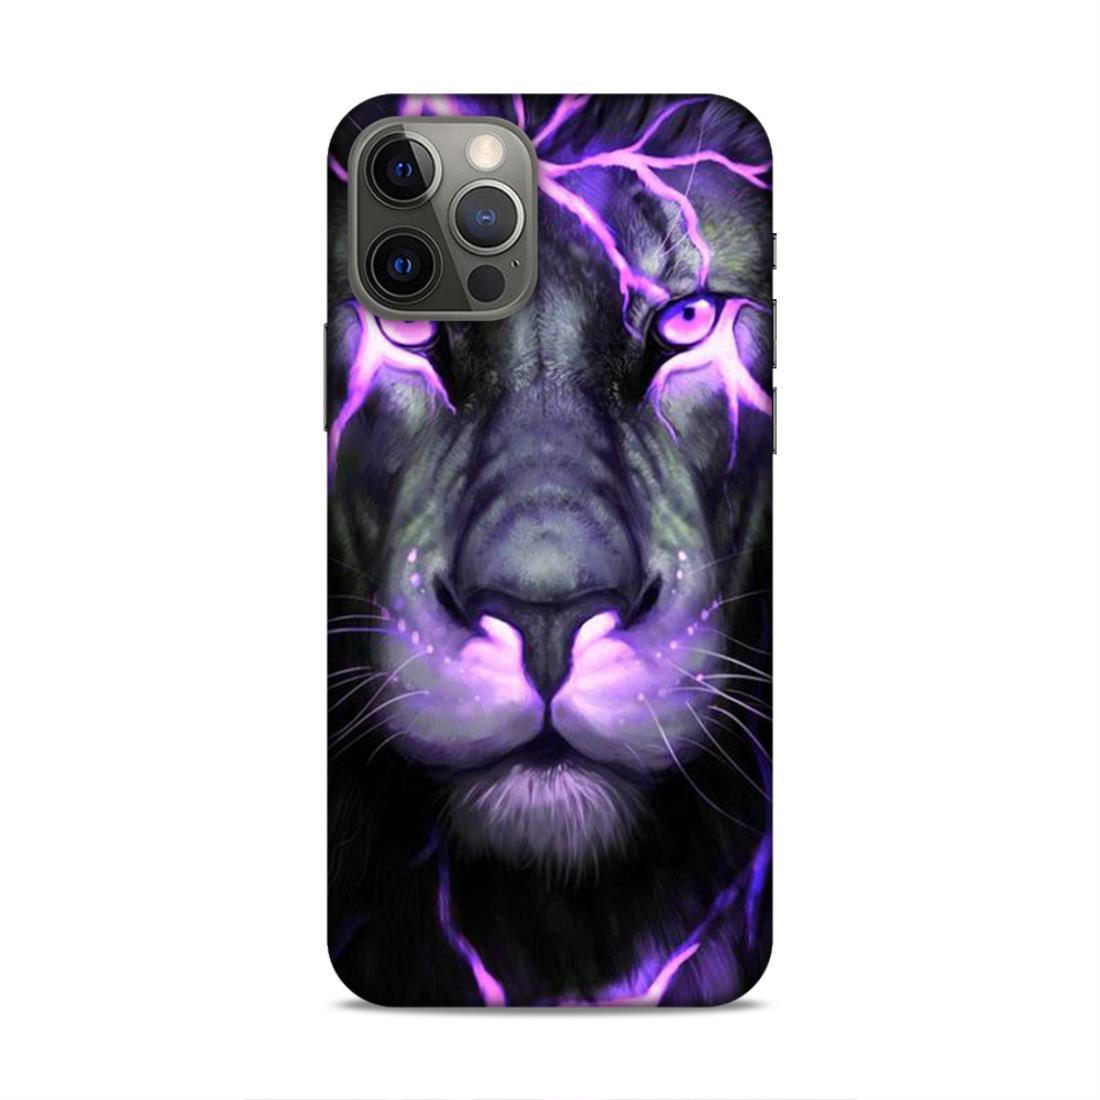 Lion Pattern iPhone 12 Pro Phone Cover Case